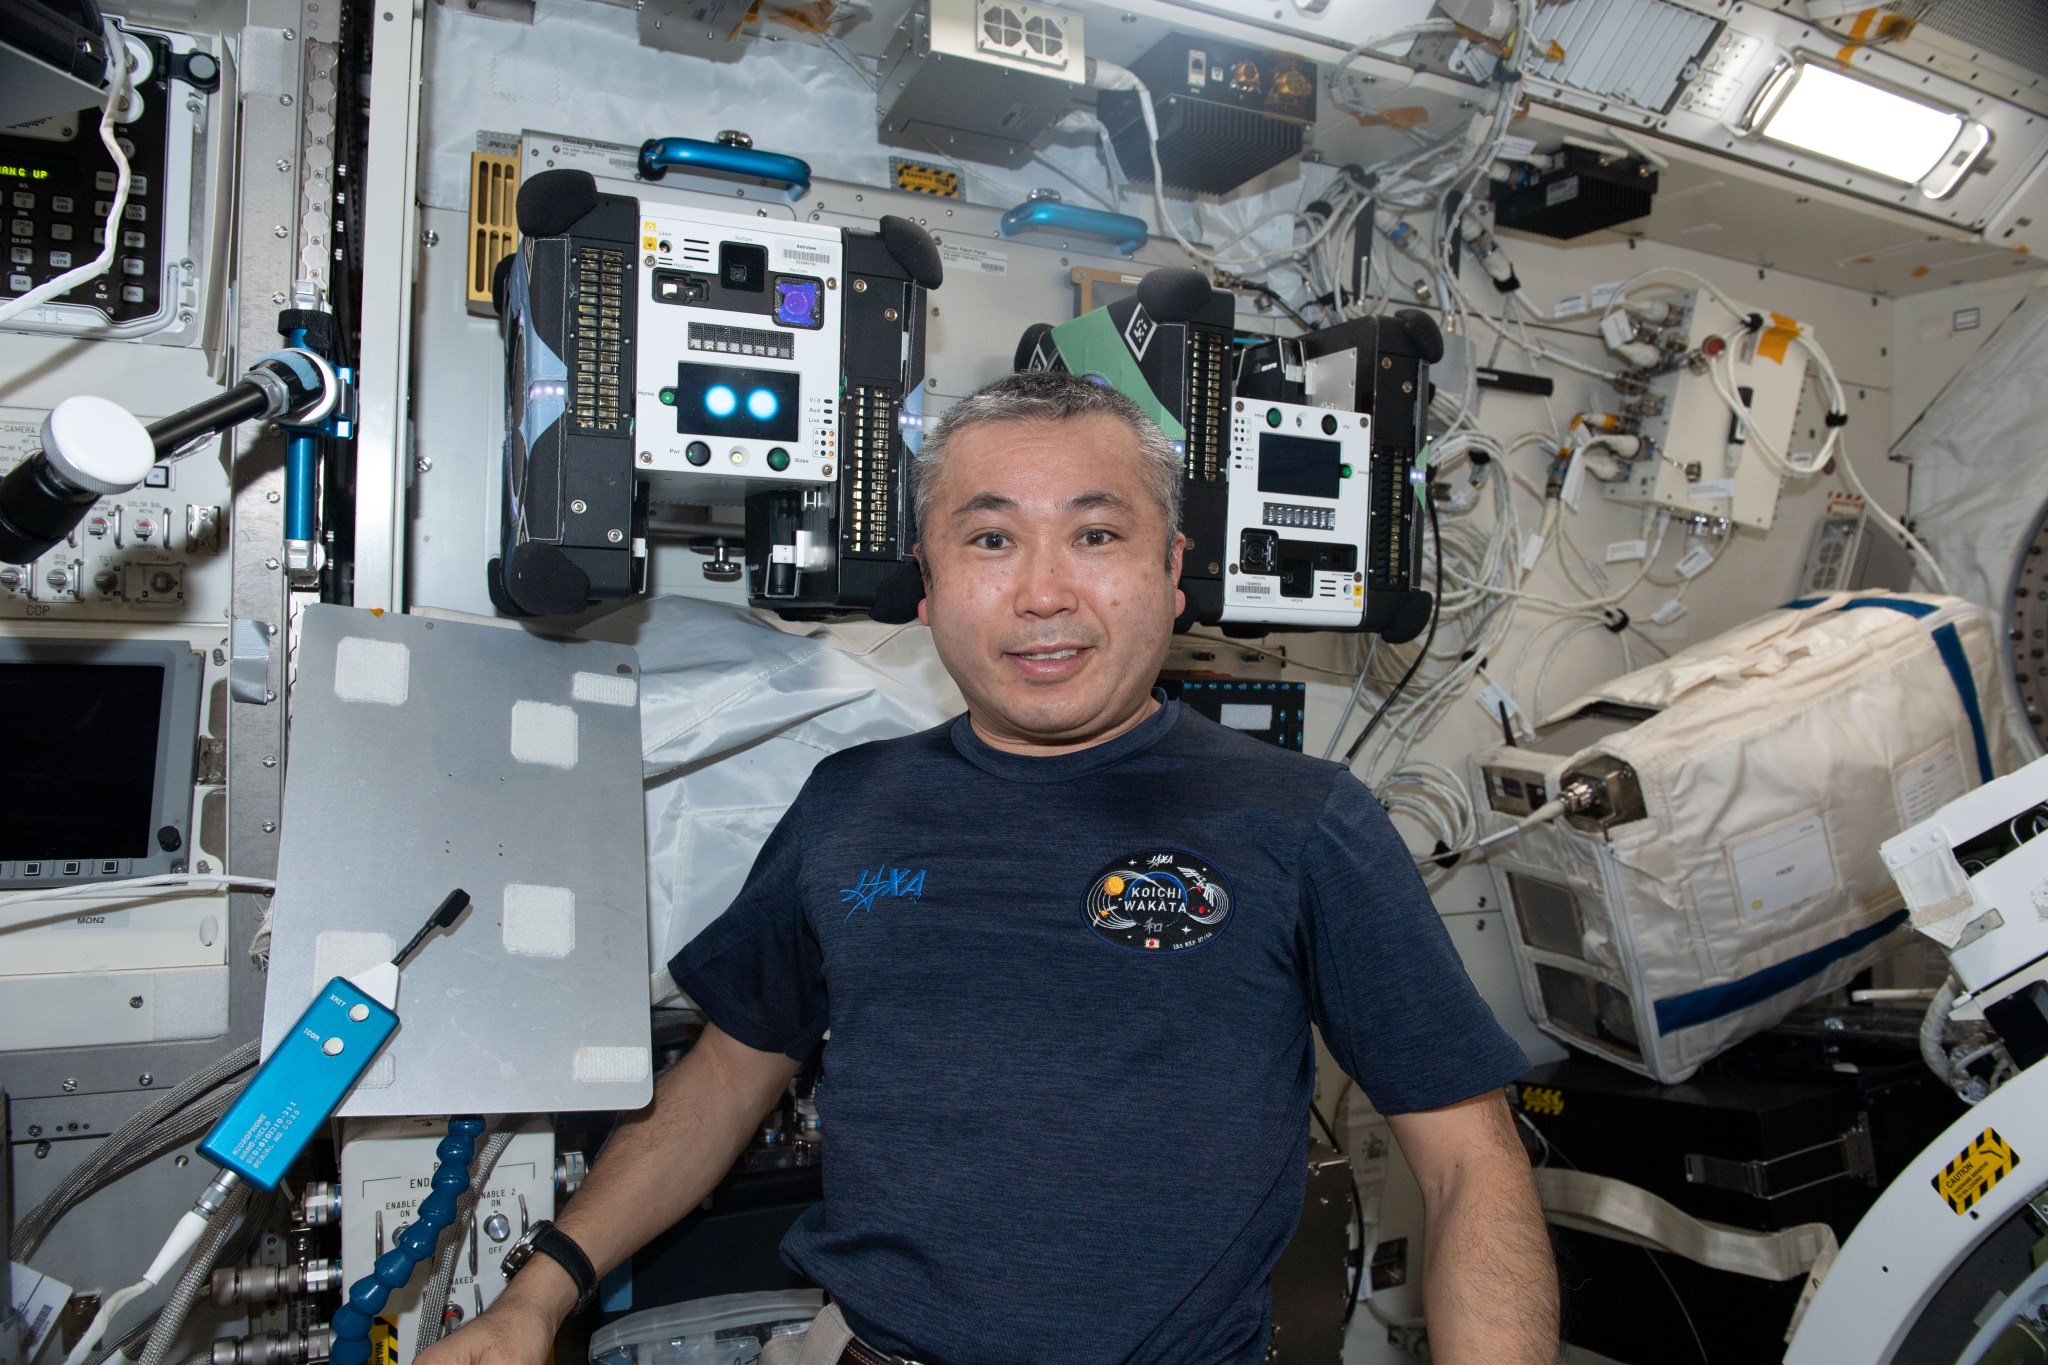 astronaut Koichi Wakata in front of the space station’s Astrobee robots floating with lots of buttons and cables behind him.